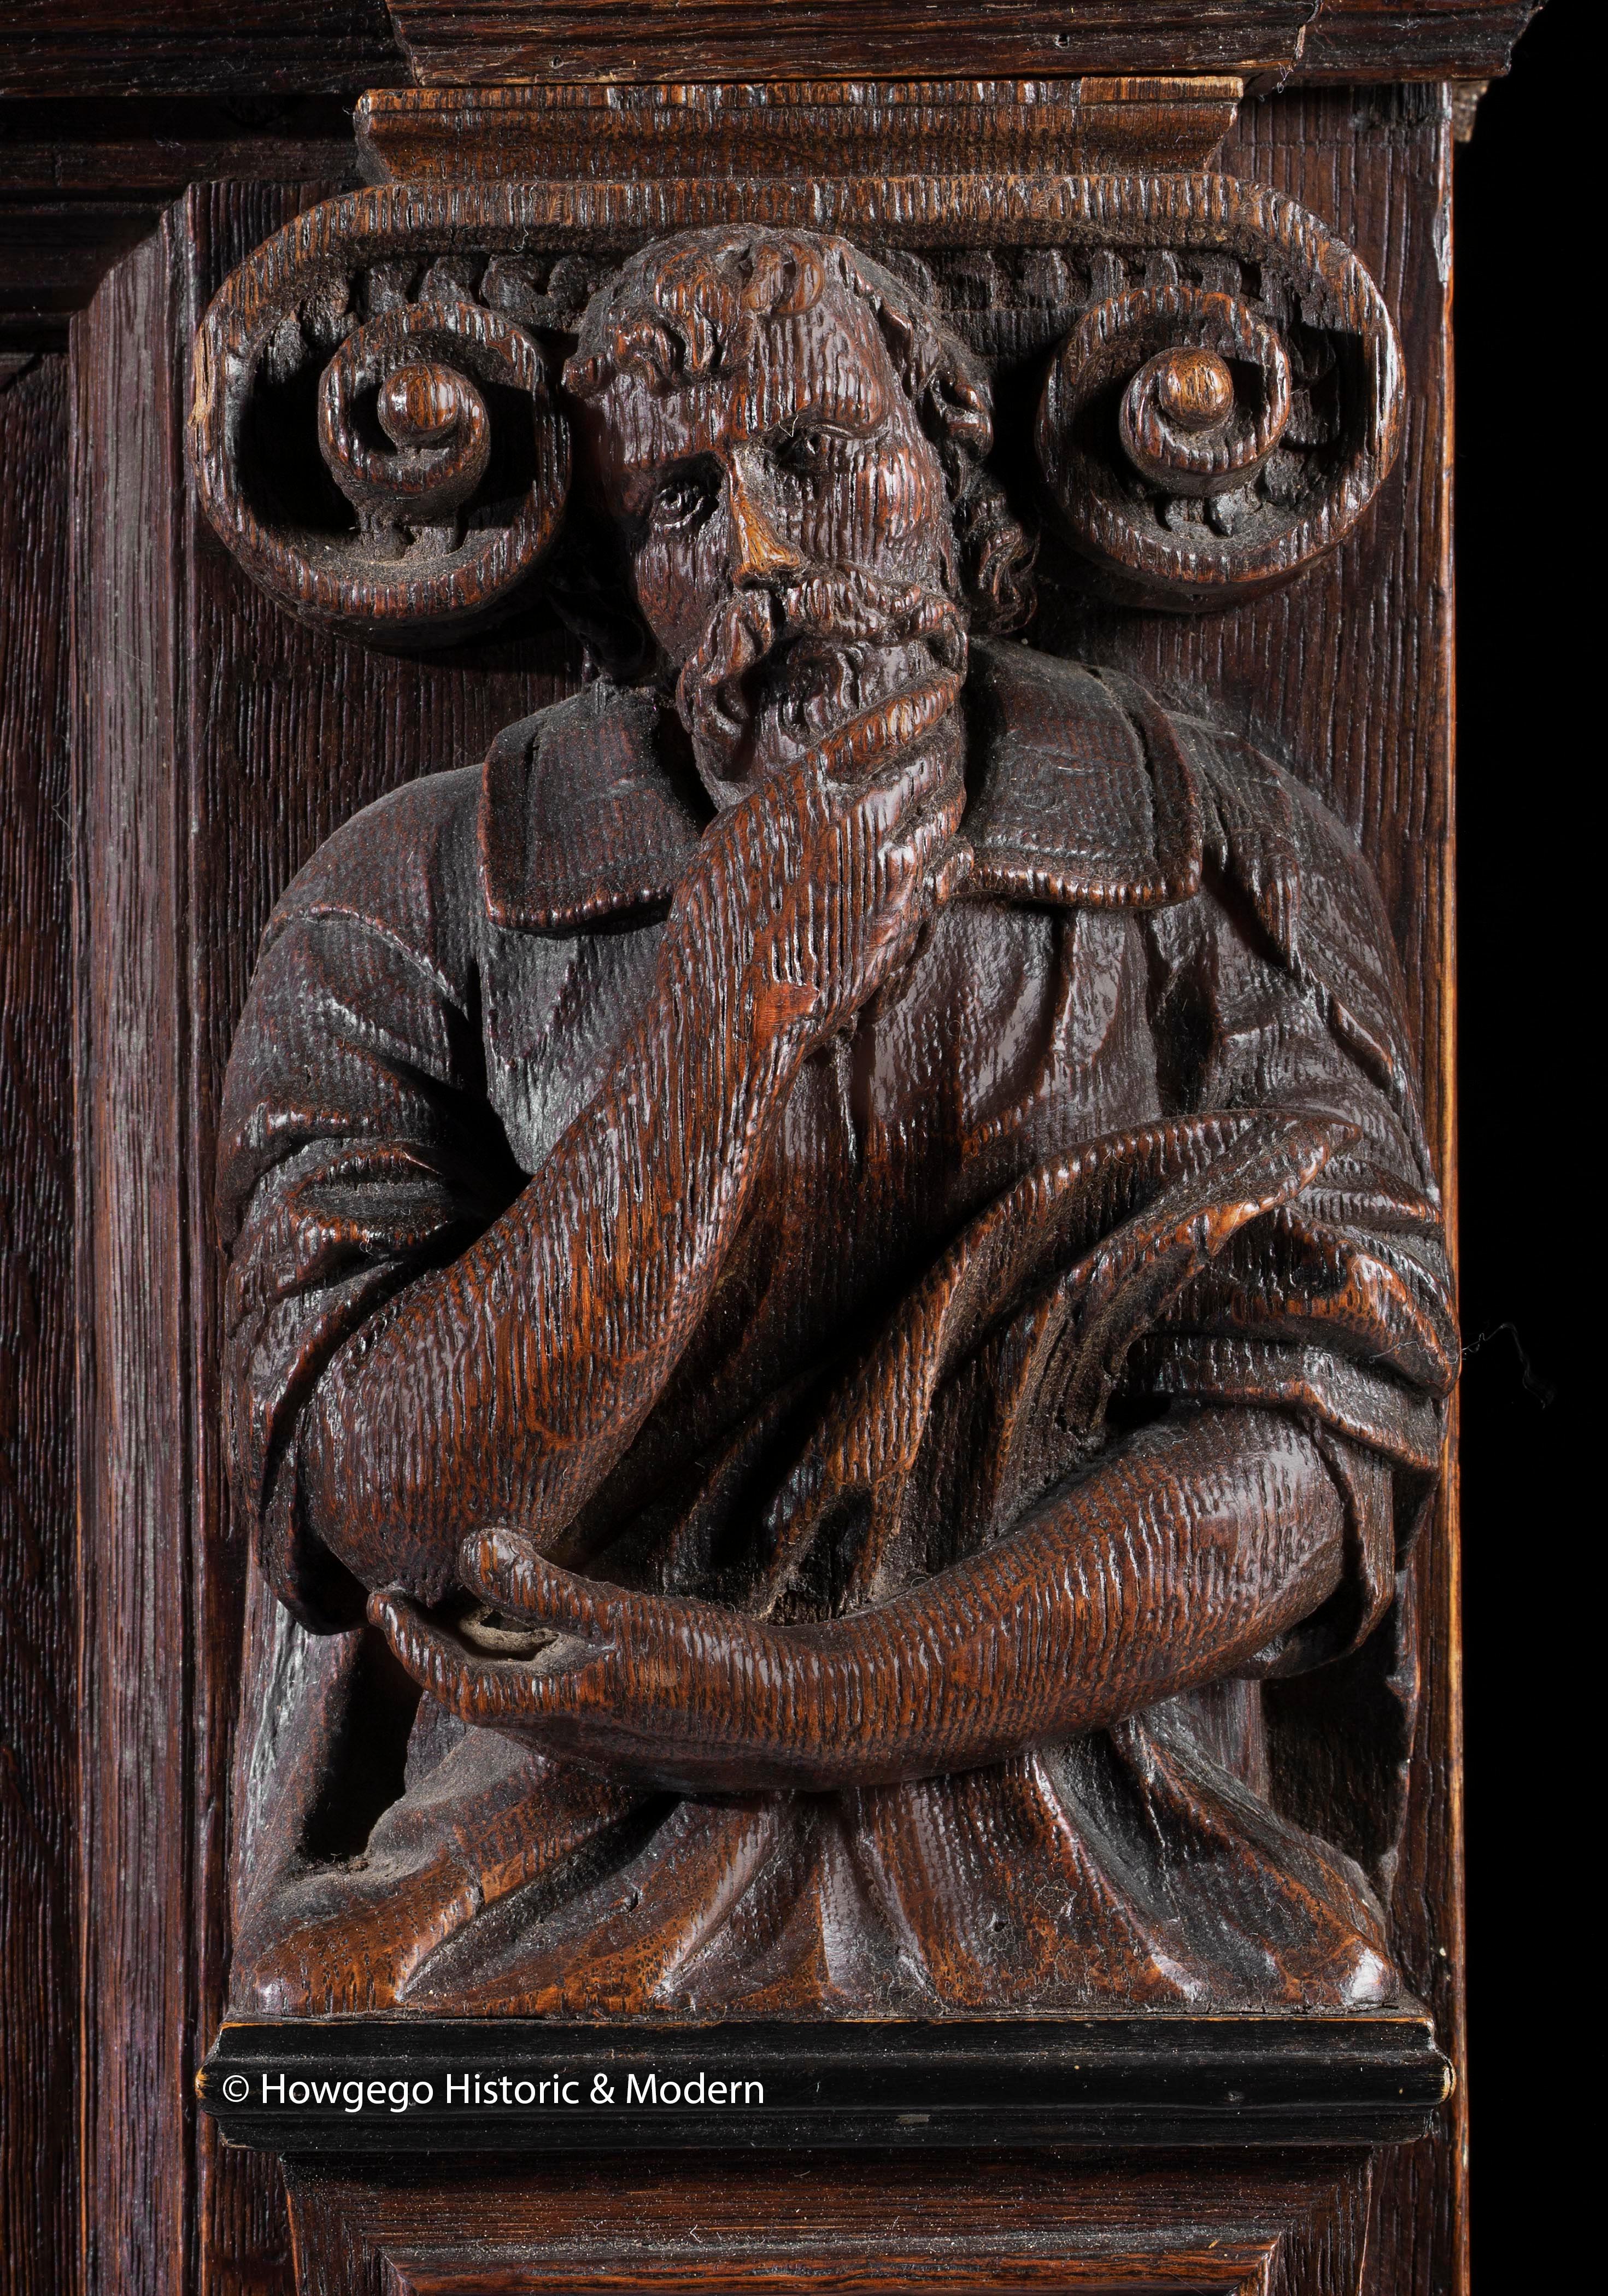 An exceptional, large, early-17th century, carved, oak & ebony, Flemish, statue cabinet or 'Beeldenkast' depicting the three theological virtues of Faith, Hope and Charity and the Cardinal Virtues of Prudence, Justice and Fortitude.

just purchased